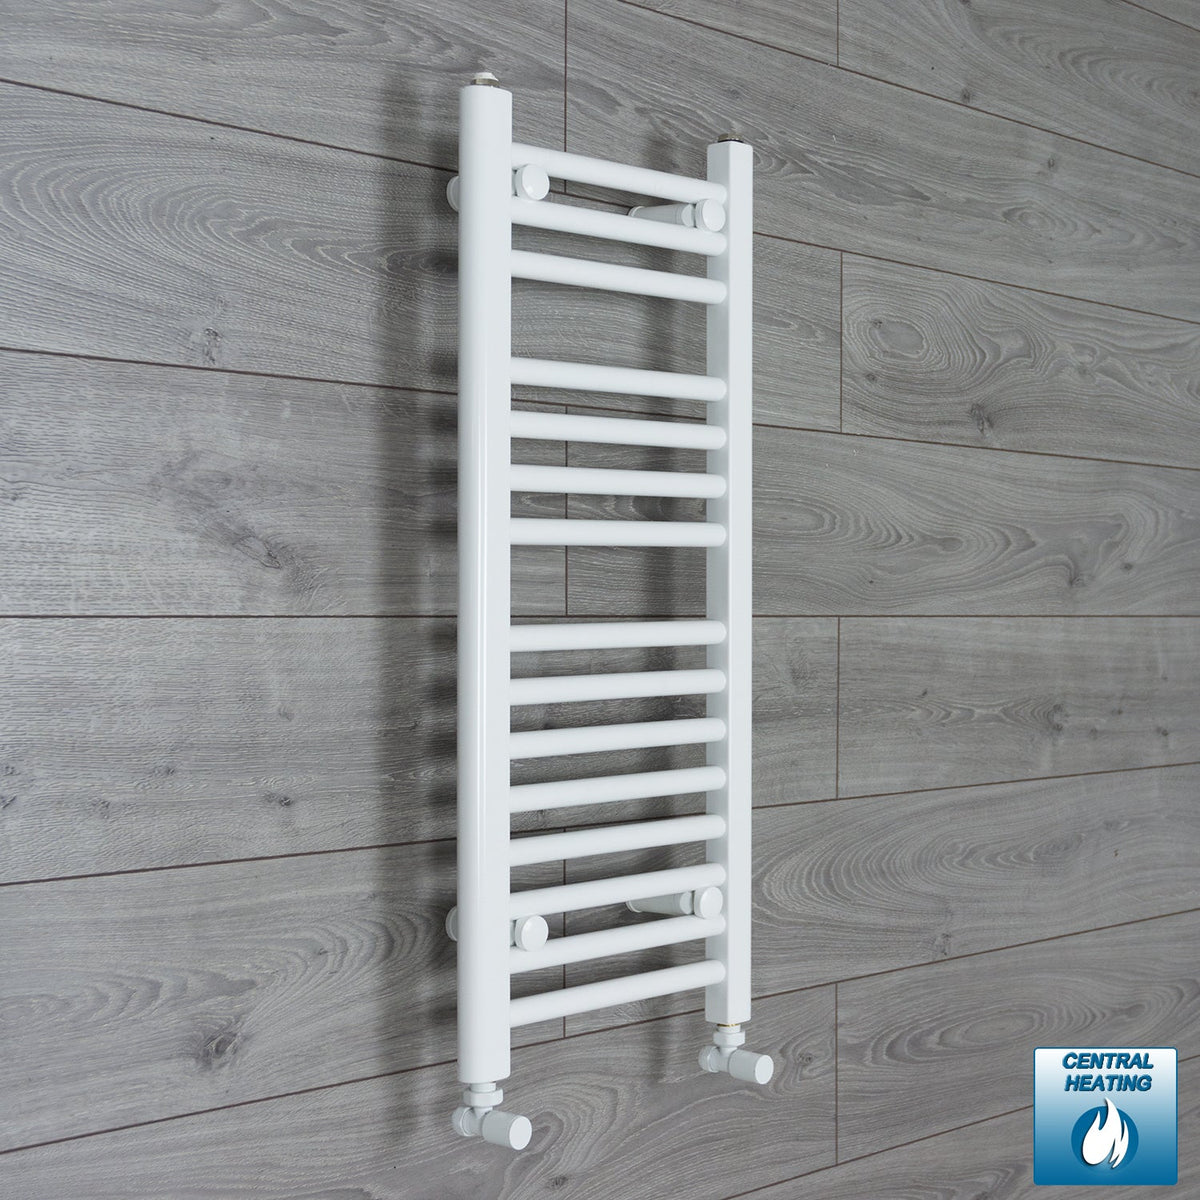 400mm Wide 800mm High White Towel Rail Radiator With Angled Valve